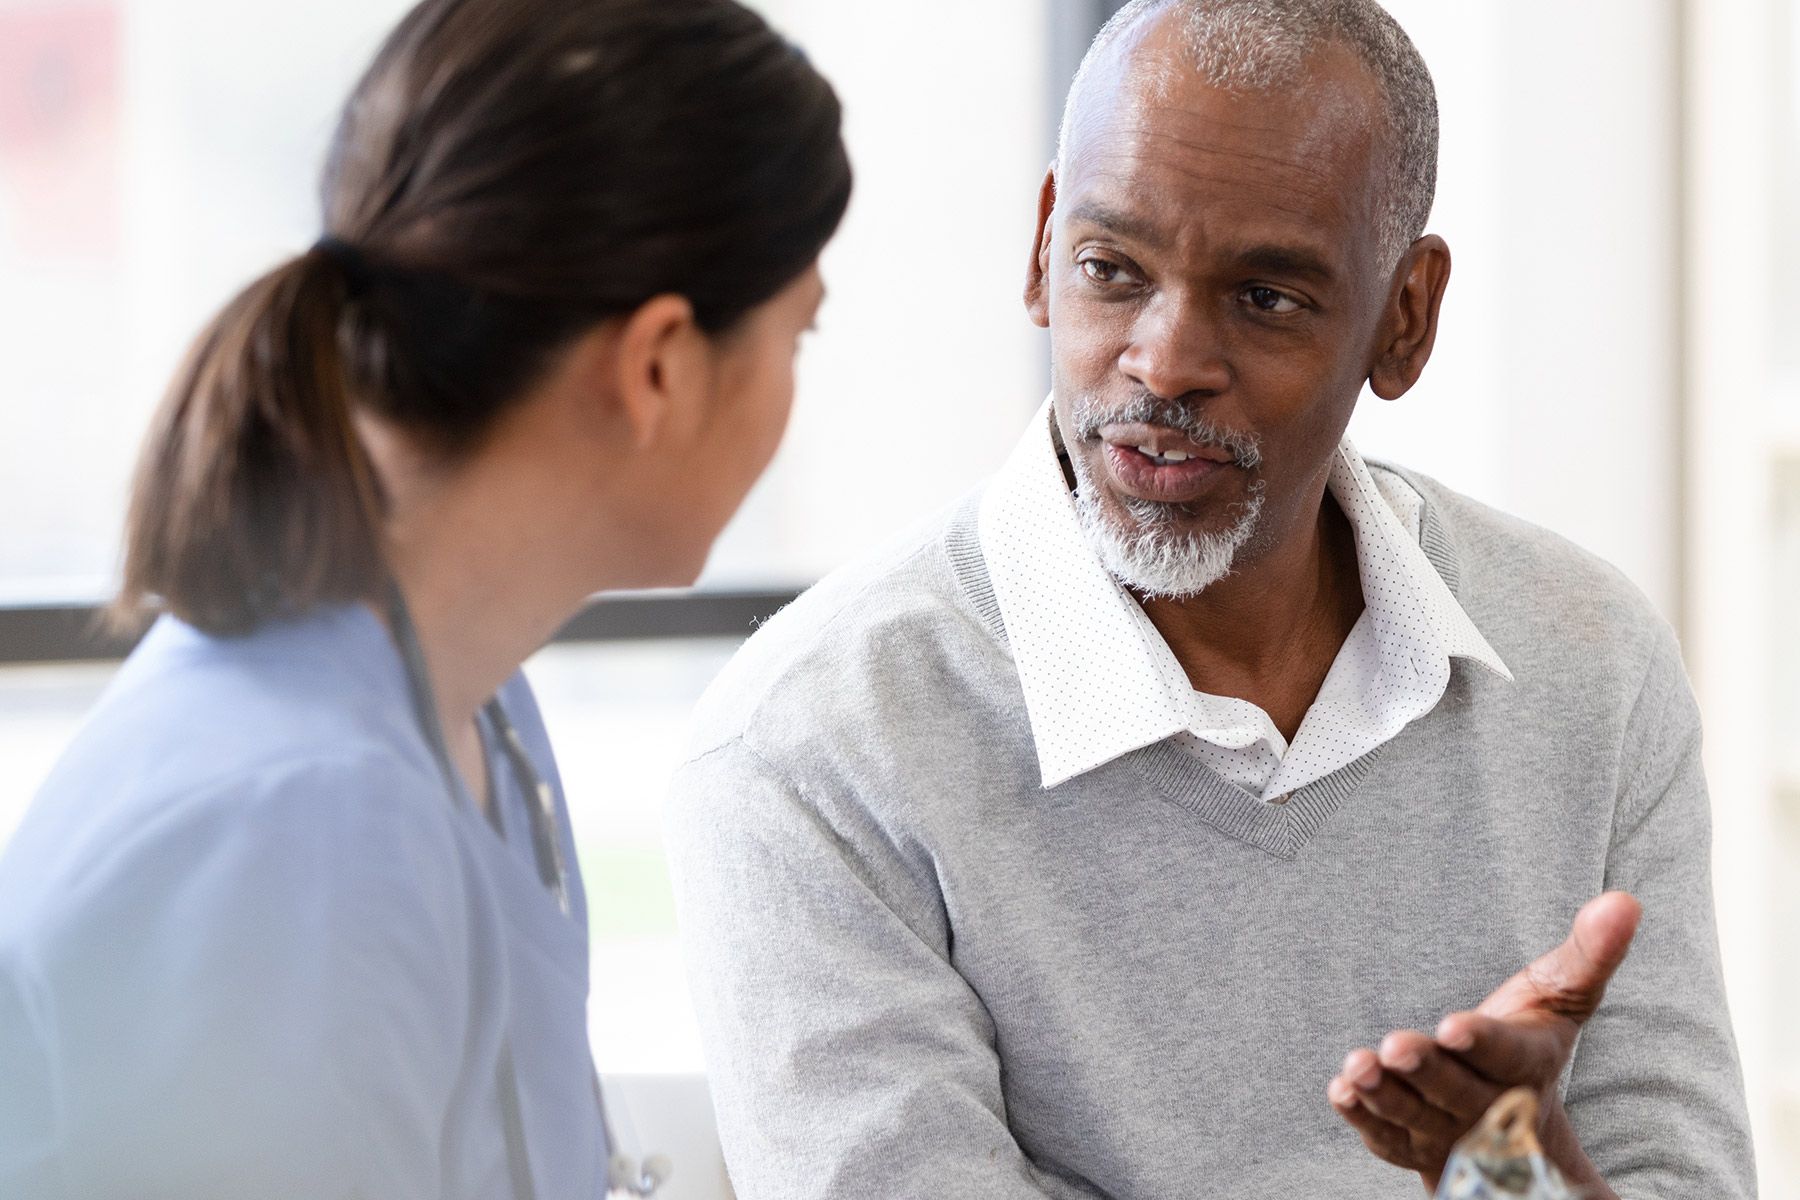 Having ‘The Talk’ with Your Doctor About Your Late-Stage NSCLC Treatment and Outlook